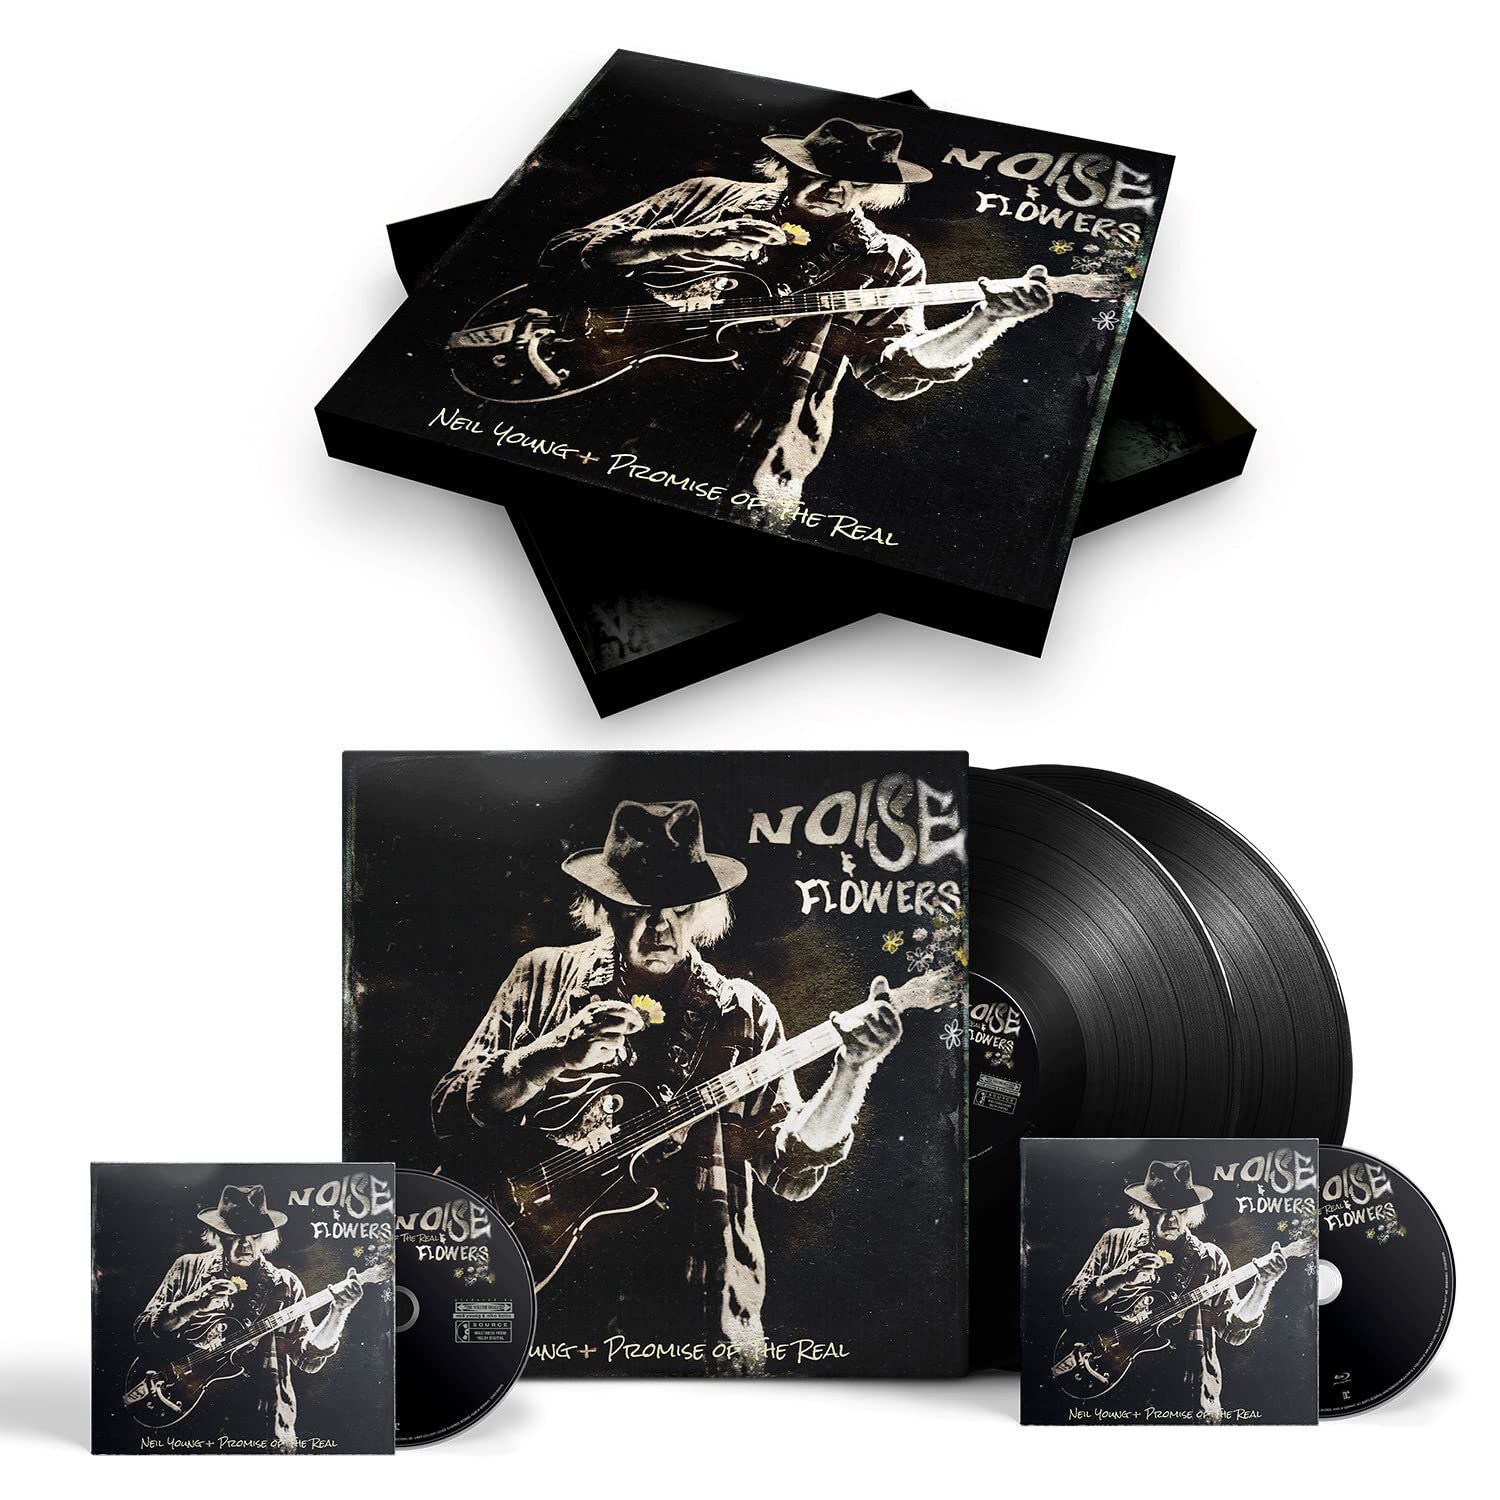 Neil Young + Promise Of The Real Noise and flowers Blu-Ray multicolor